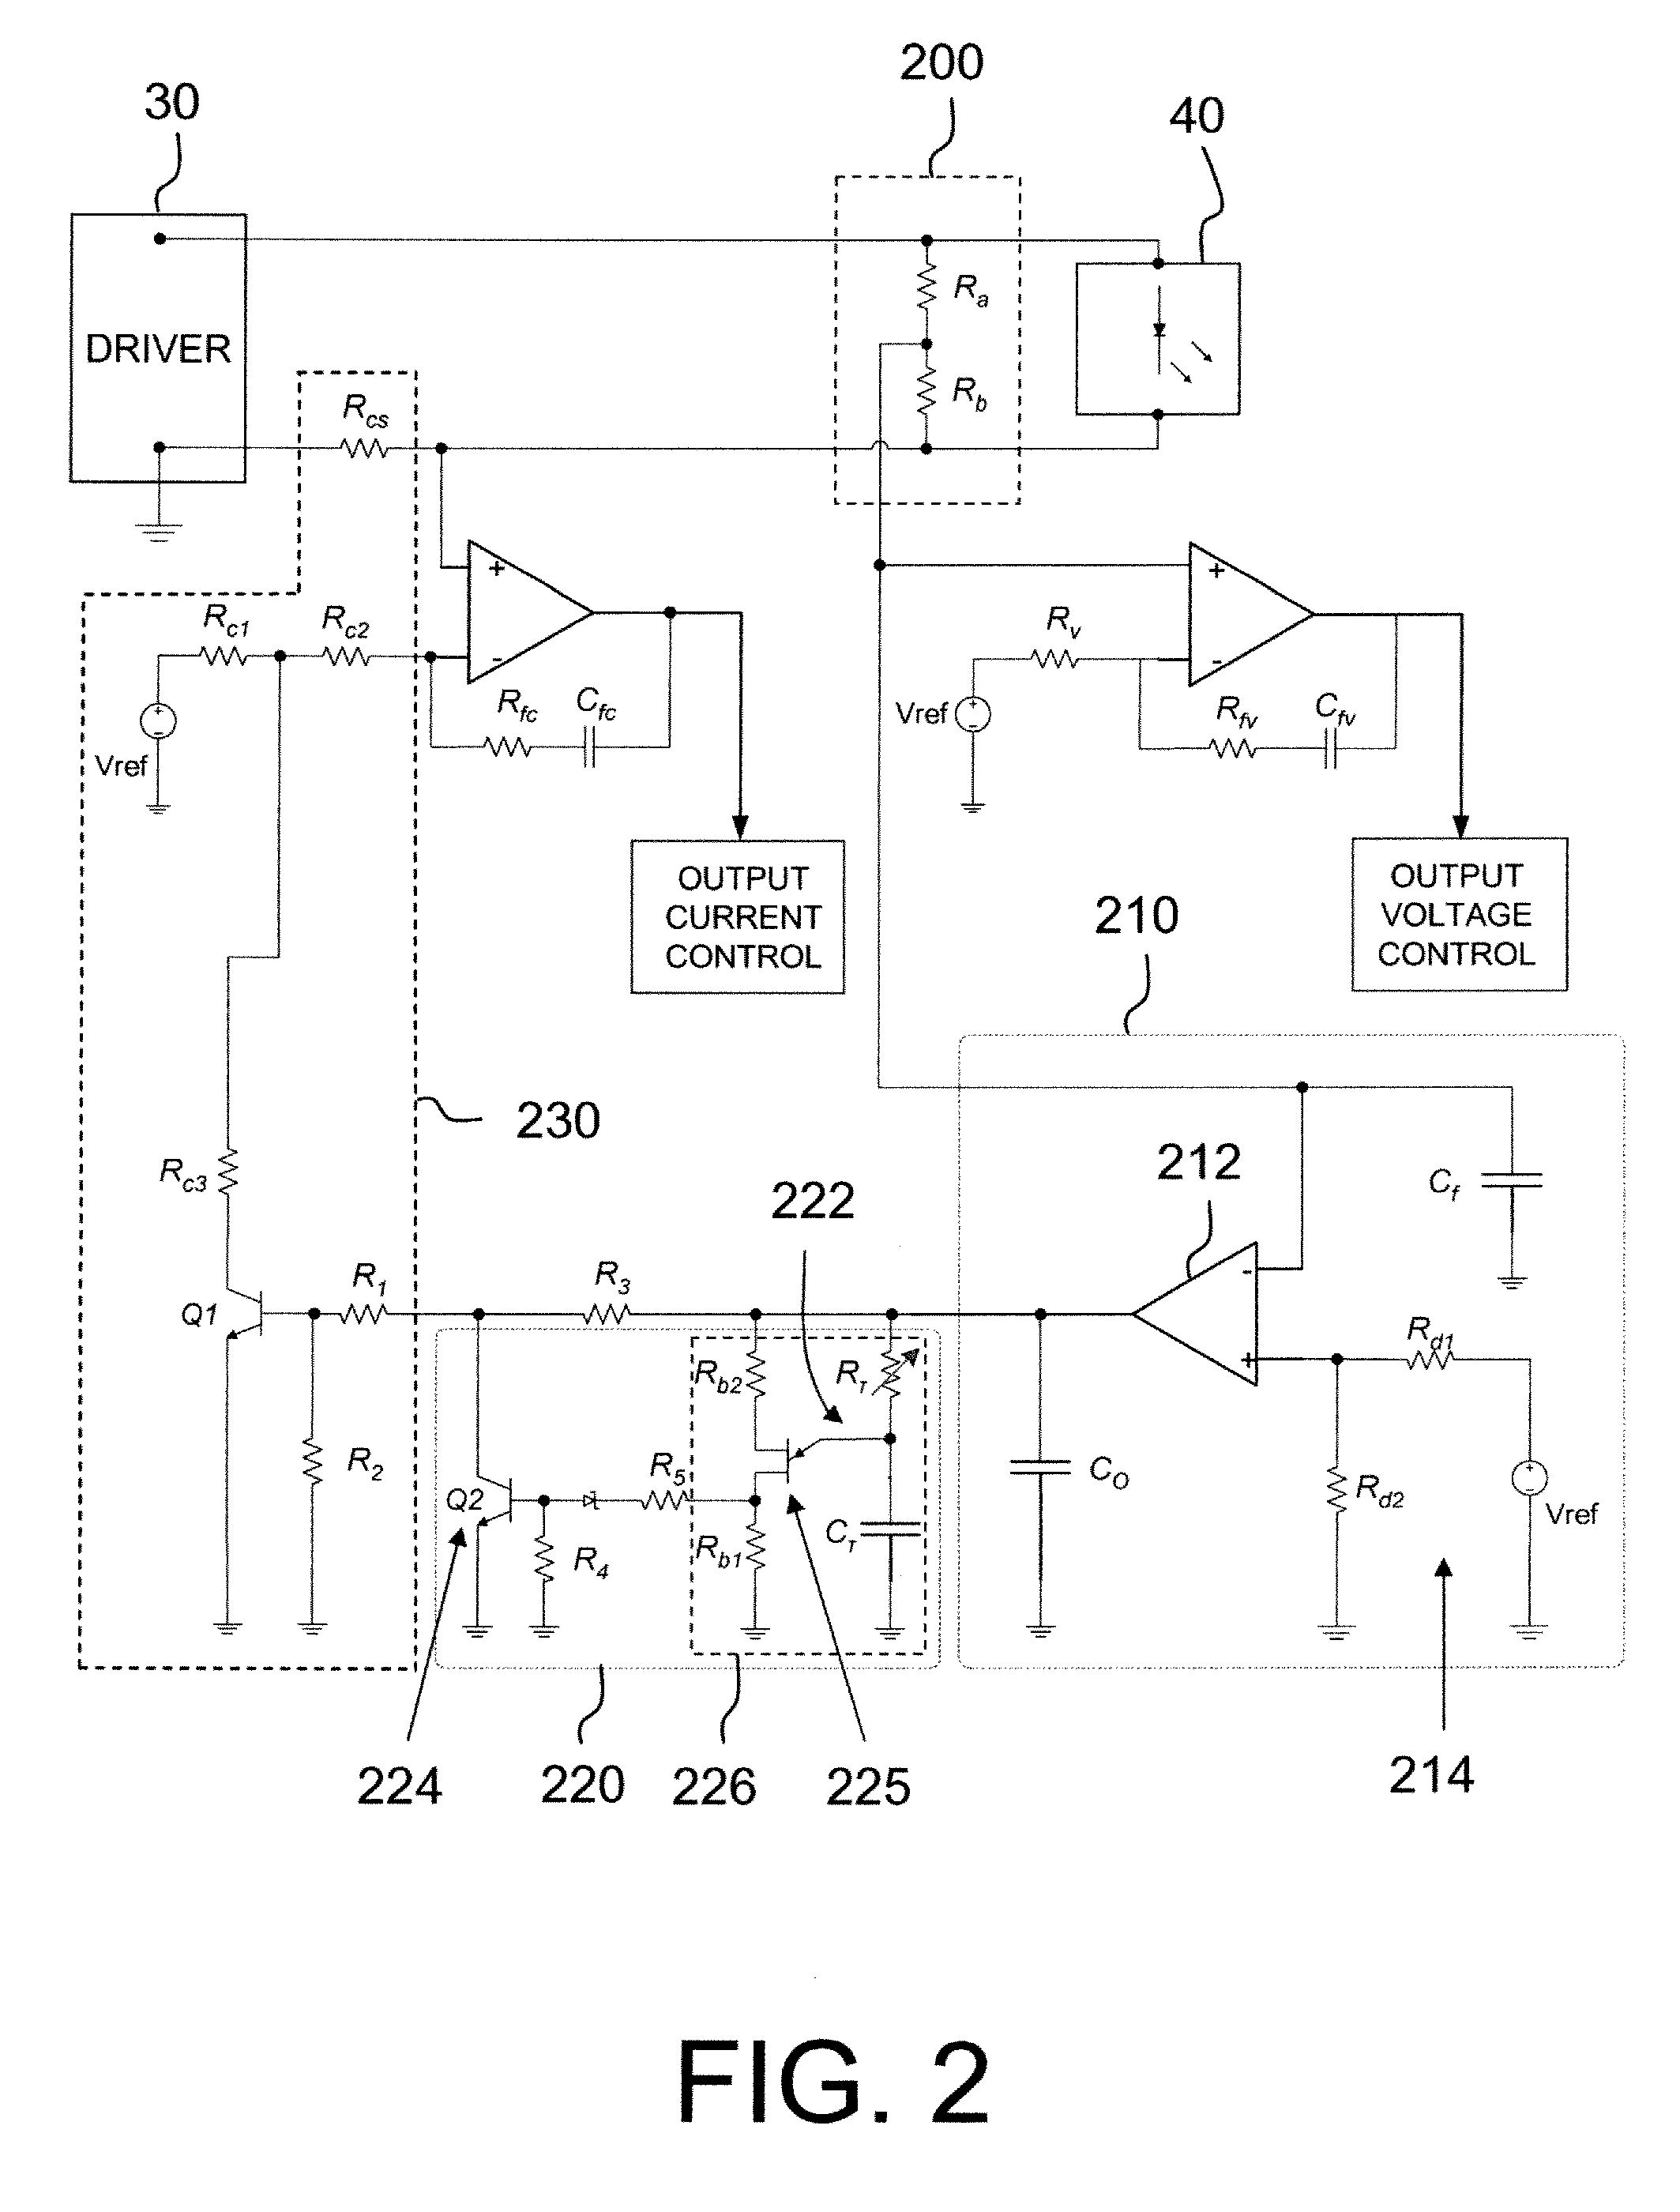 Illumination device with electrical variable scattering element